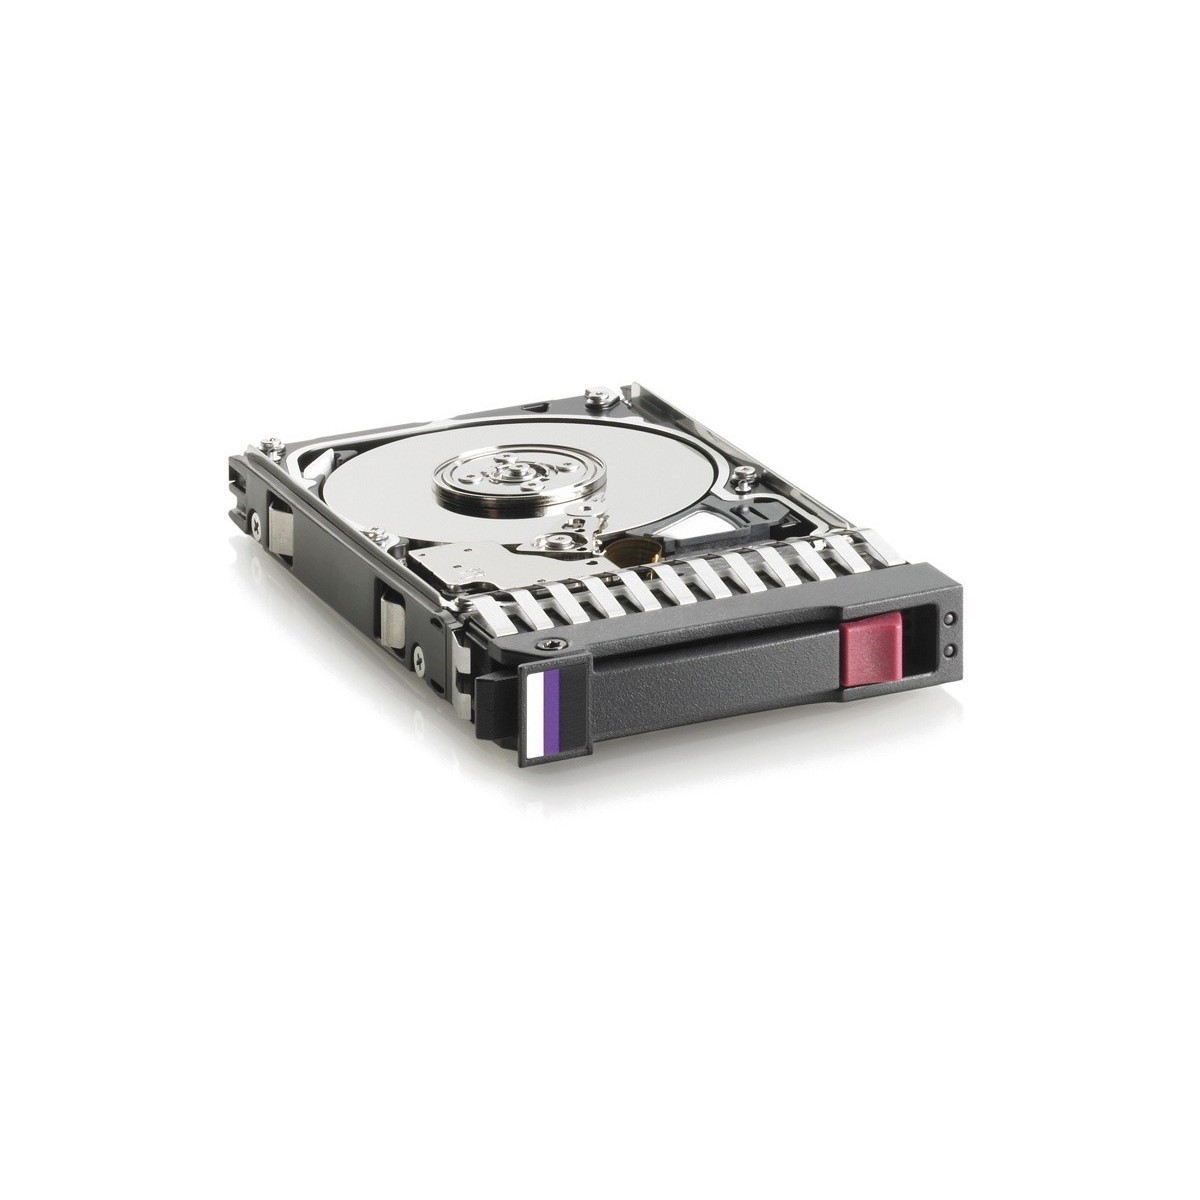 HPE 300 Gb SAS 10.000Rpm 2.5 Inch - Hdd - Serial Attached SCSI (SAS)